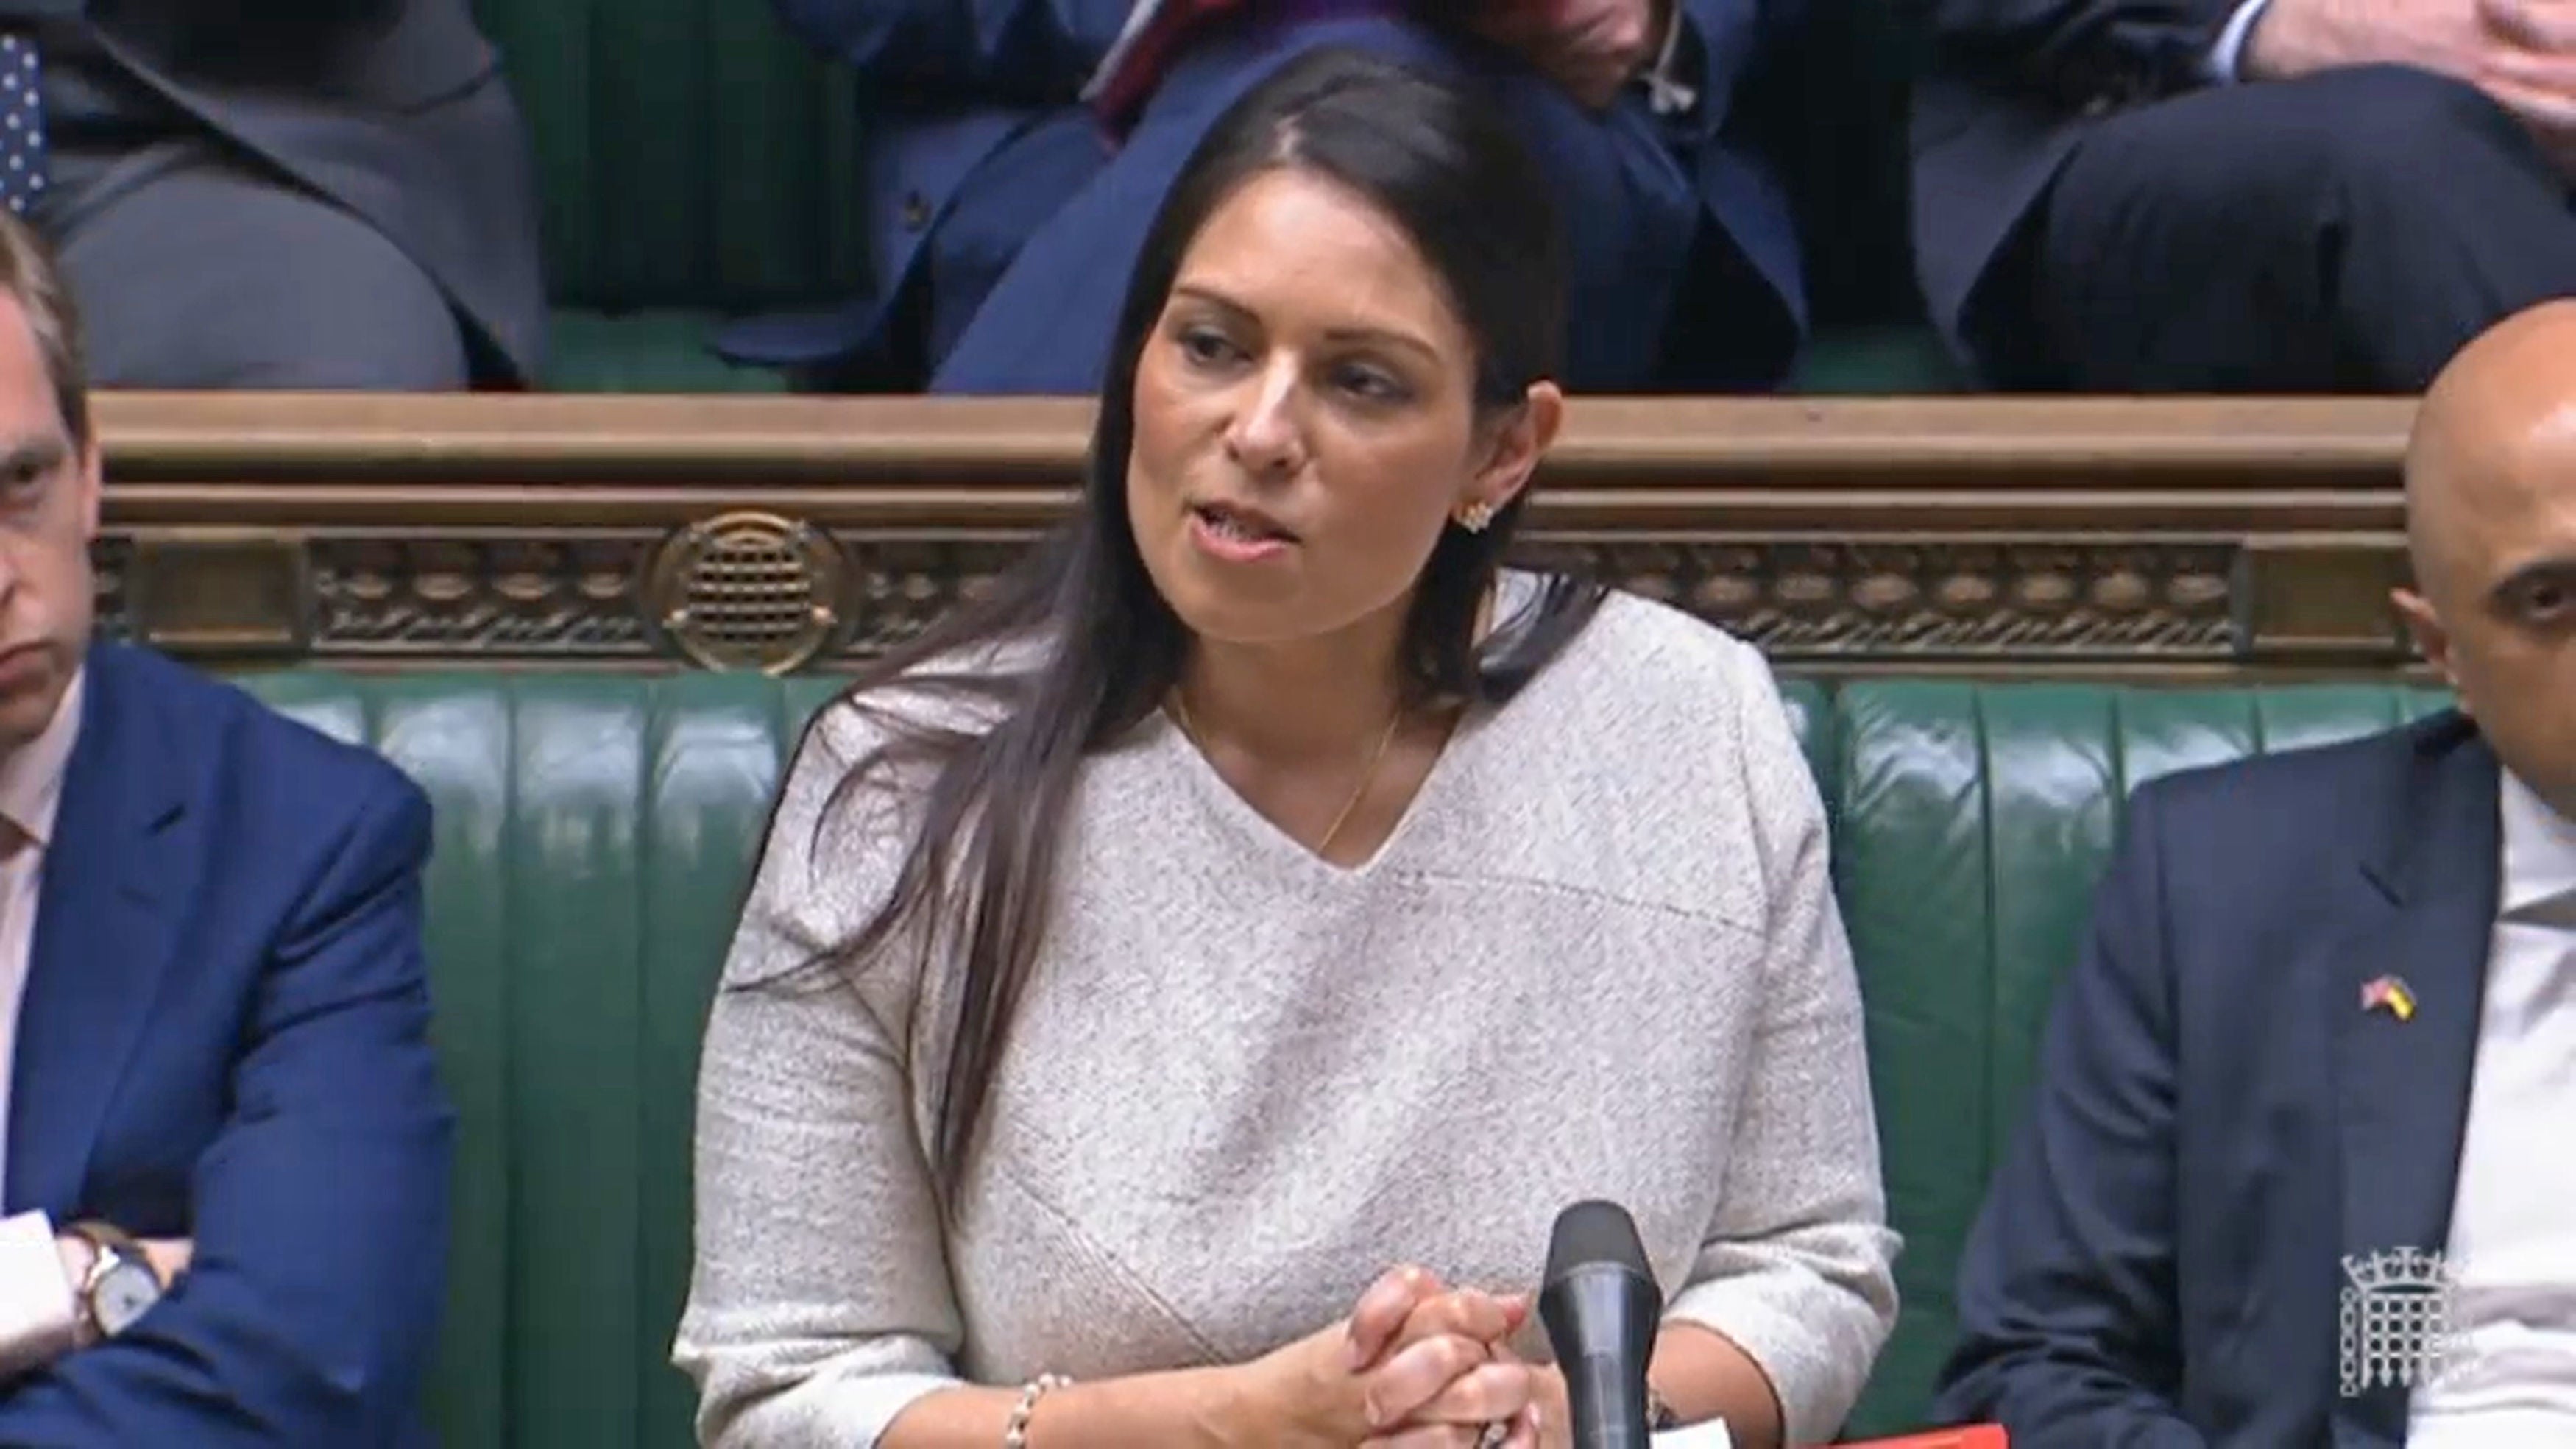 Priti Patel was criticised by one of her predecessors and party colleagues, Theresa May